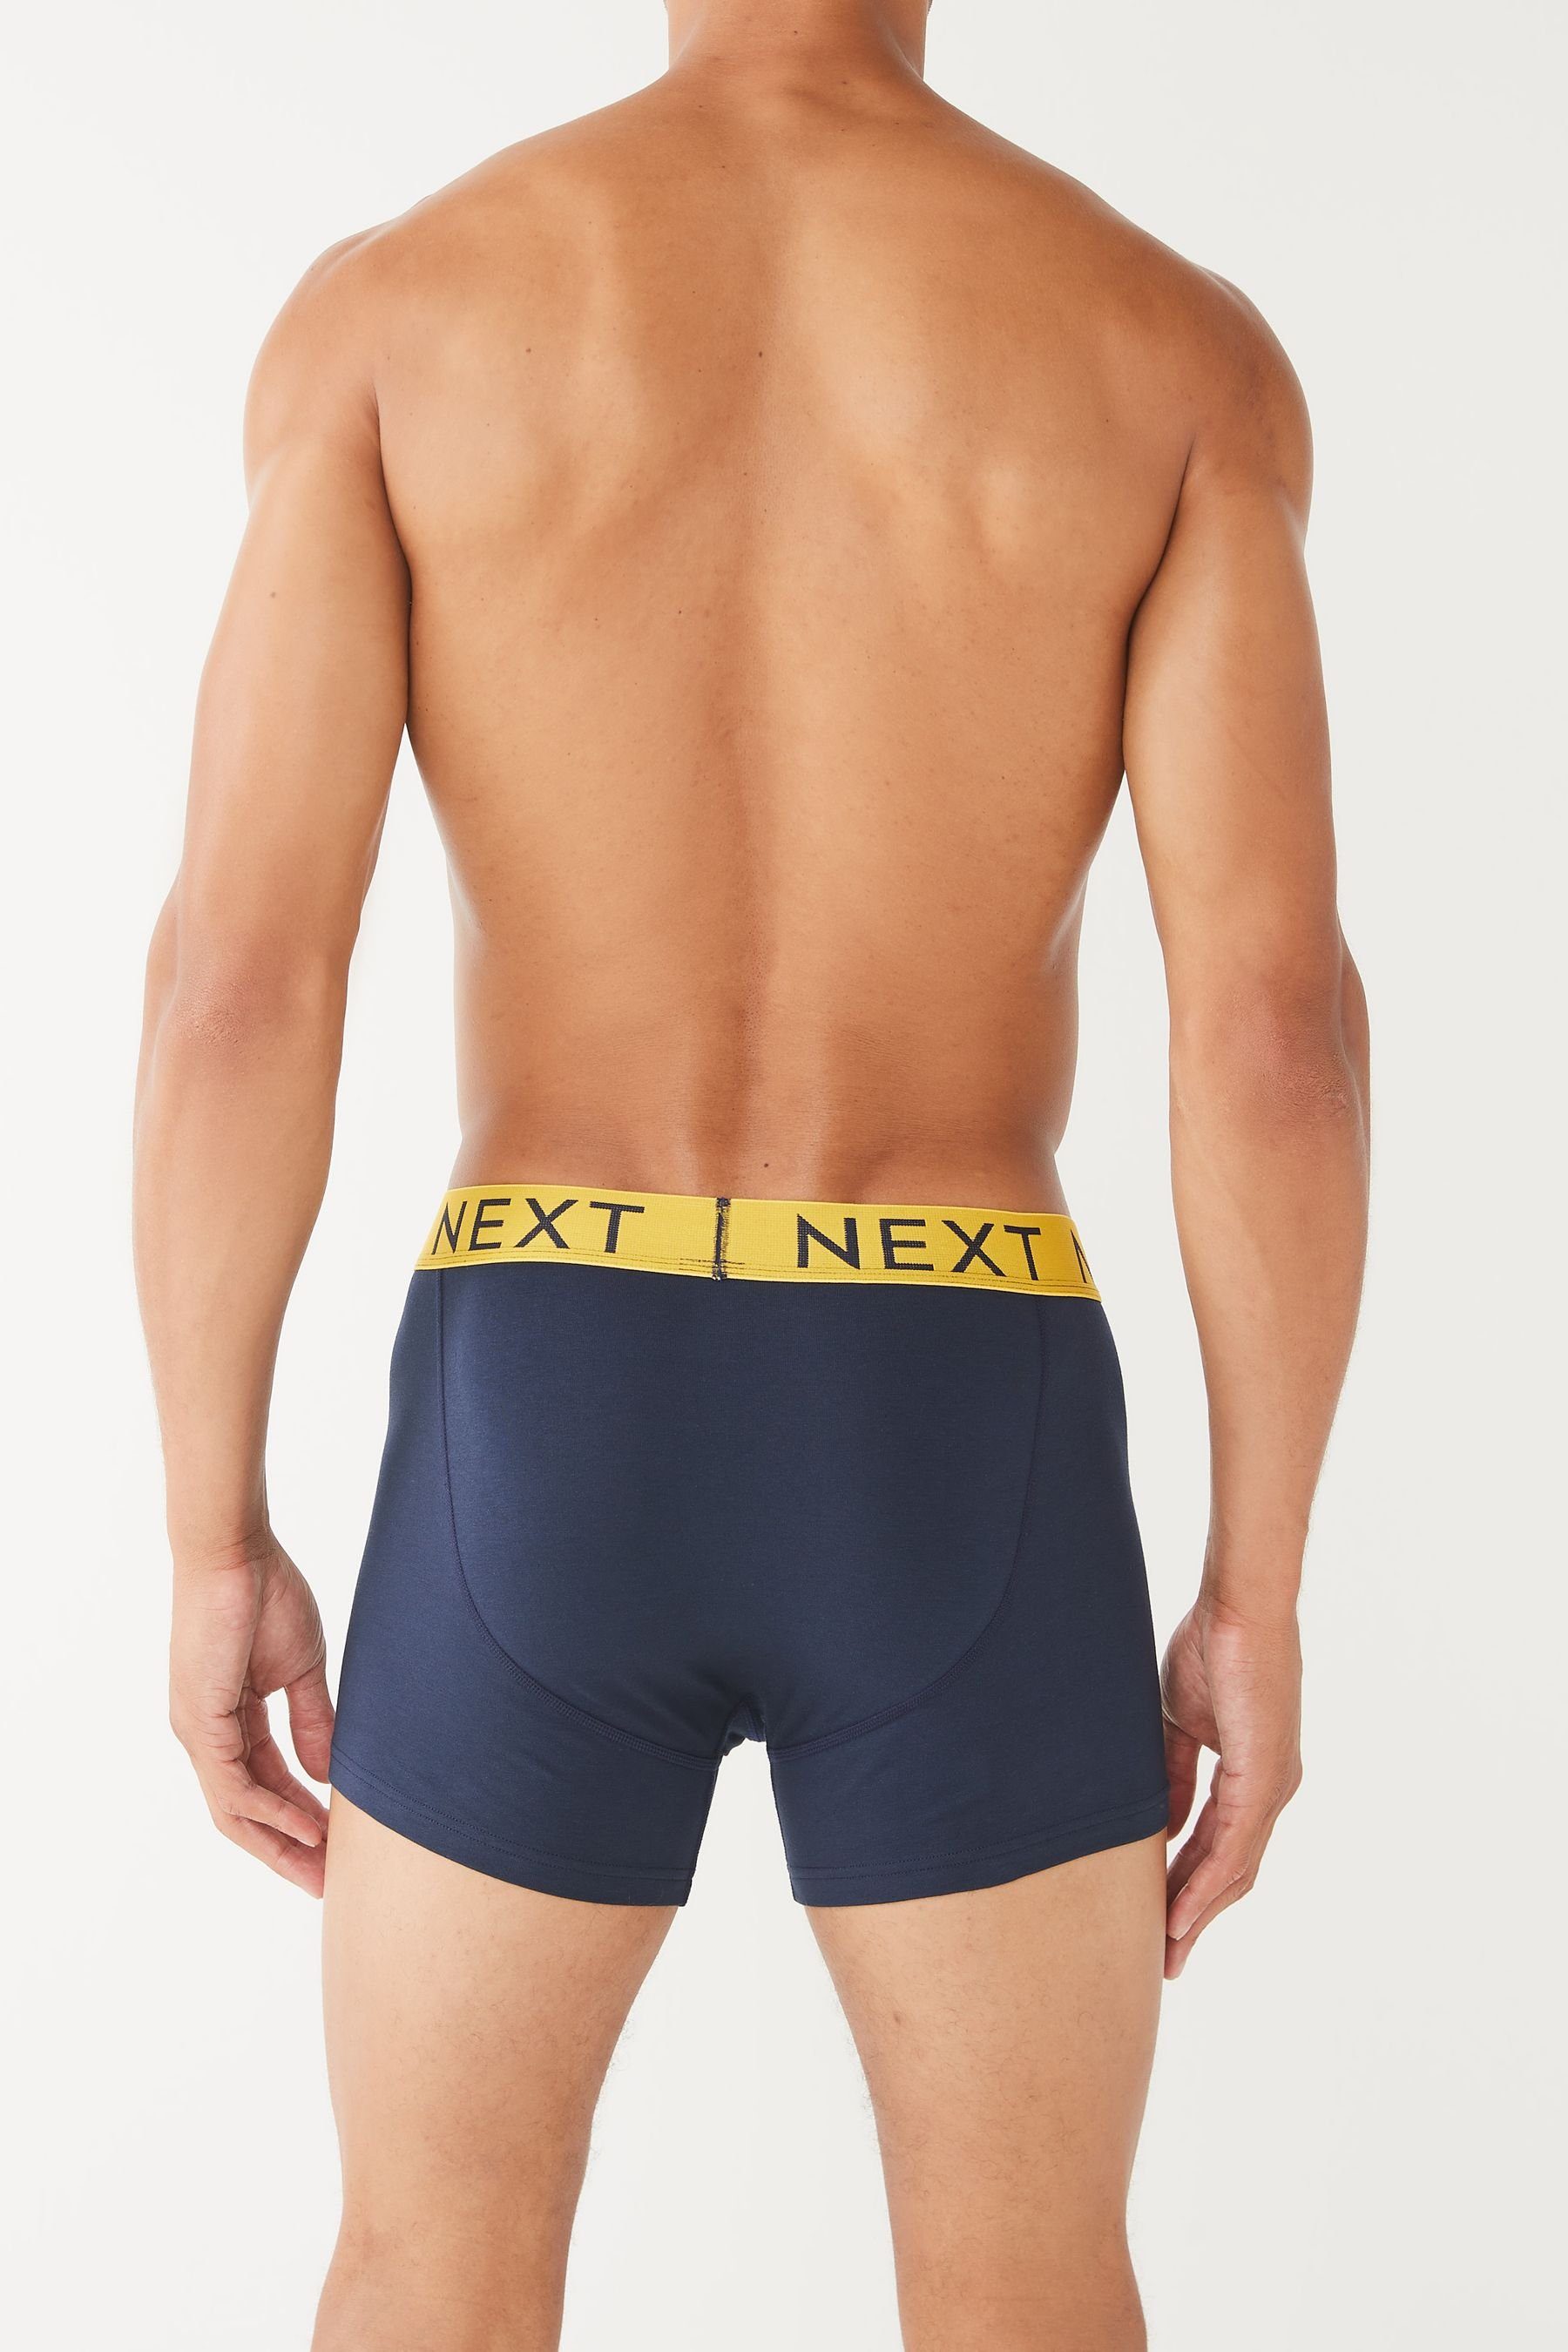 Next Boxershorts Navy Bright Boxershorts, 8er-Pack (8-St) A-Front Waistband